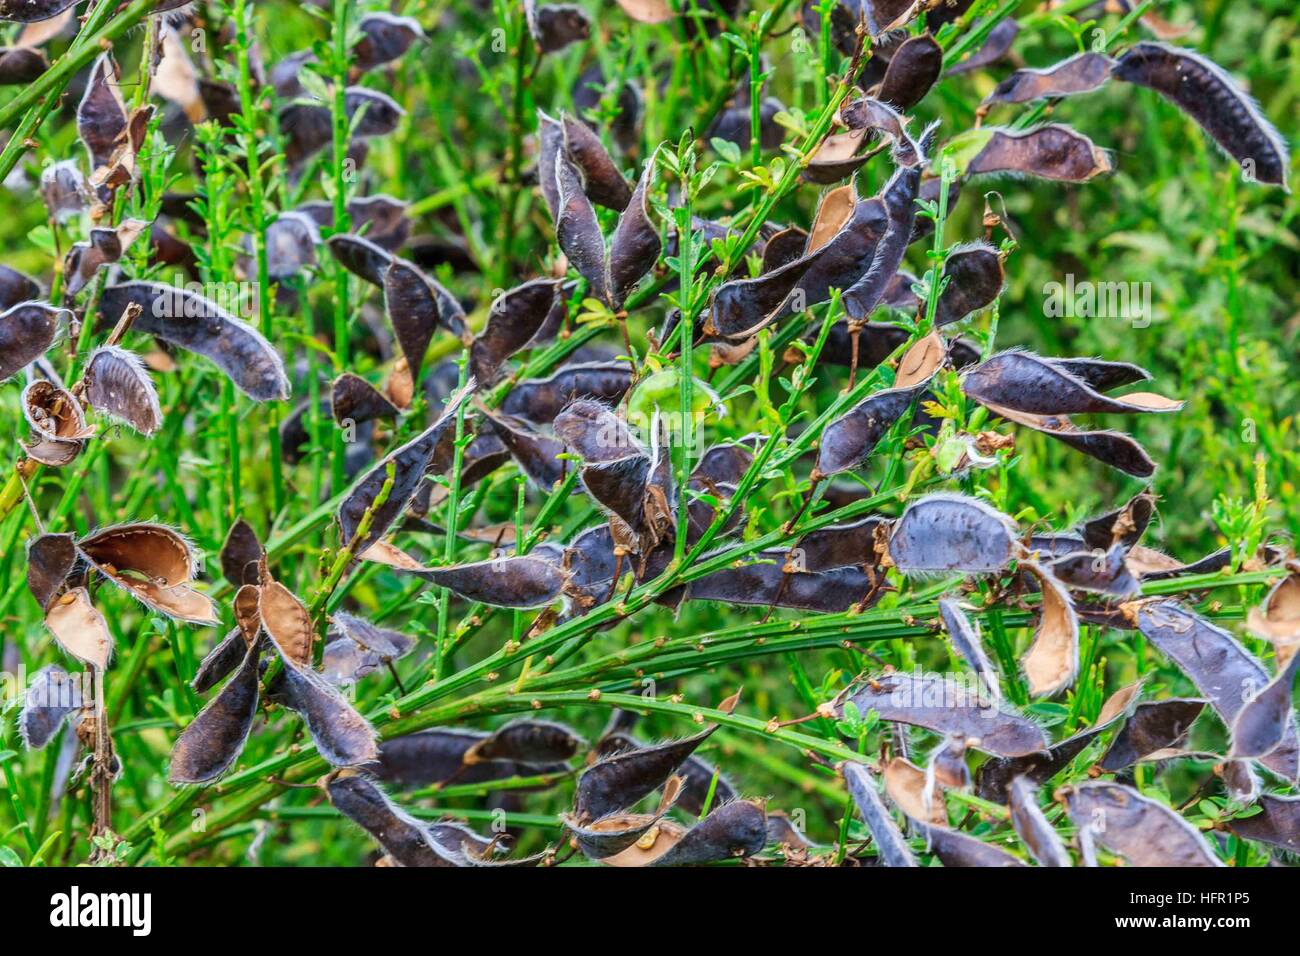 Dried seed pods after dispersing seeds from the pea family in natural open ground. Stock Photo